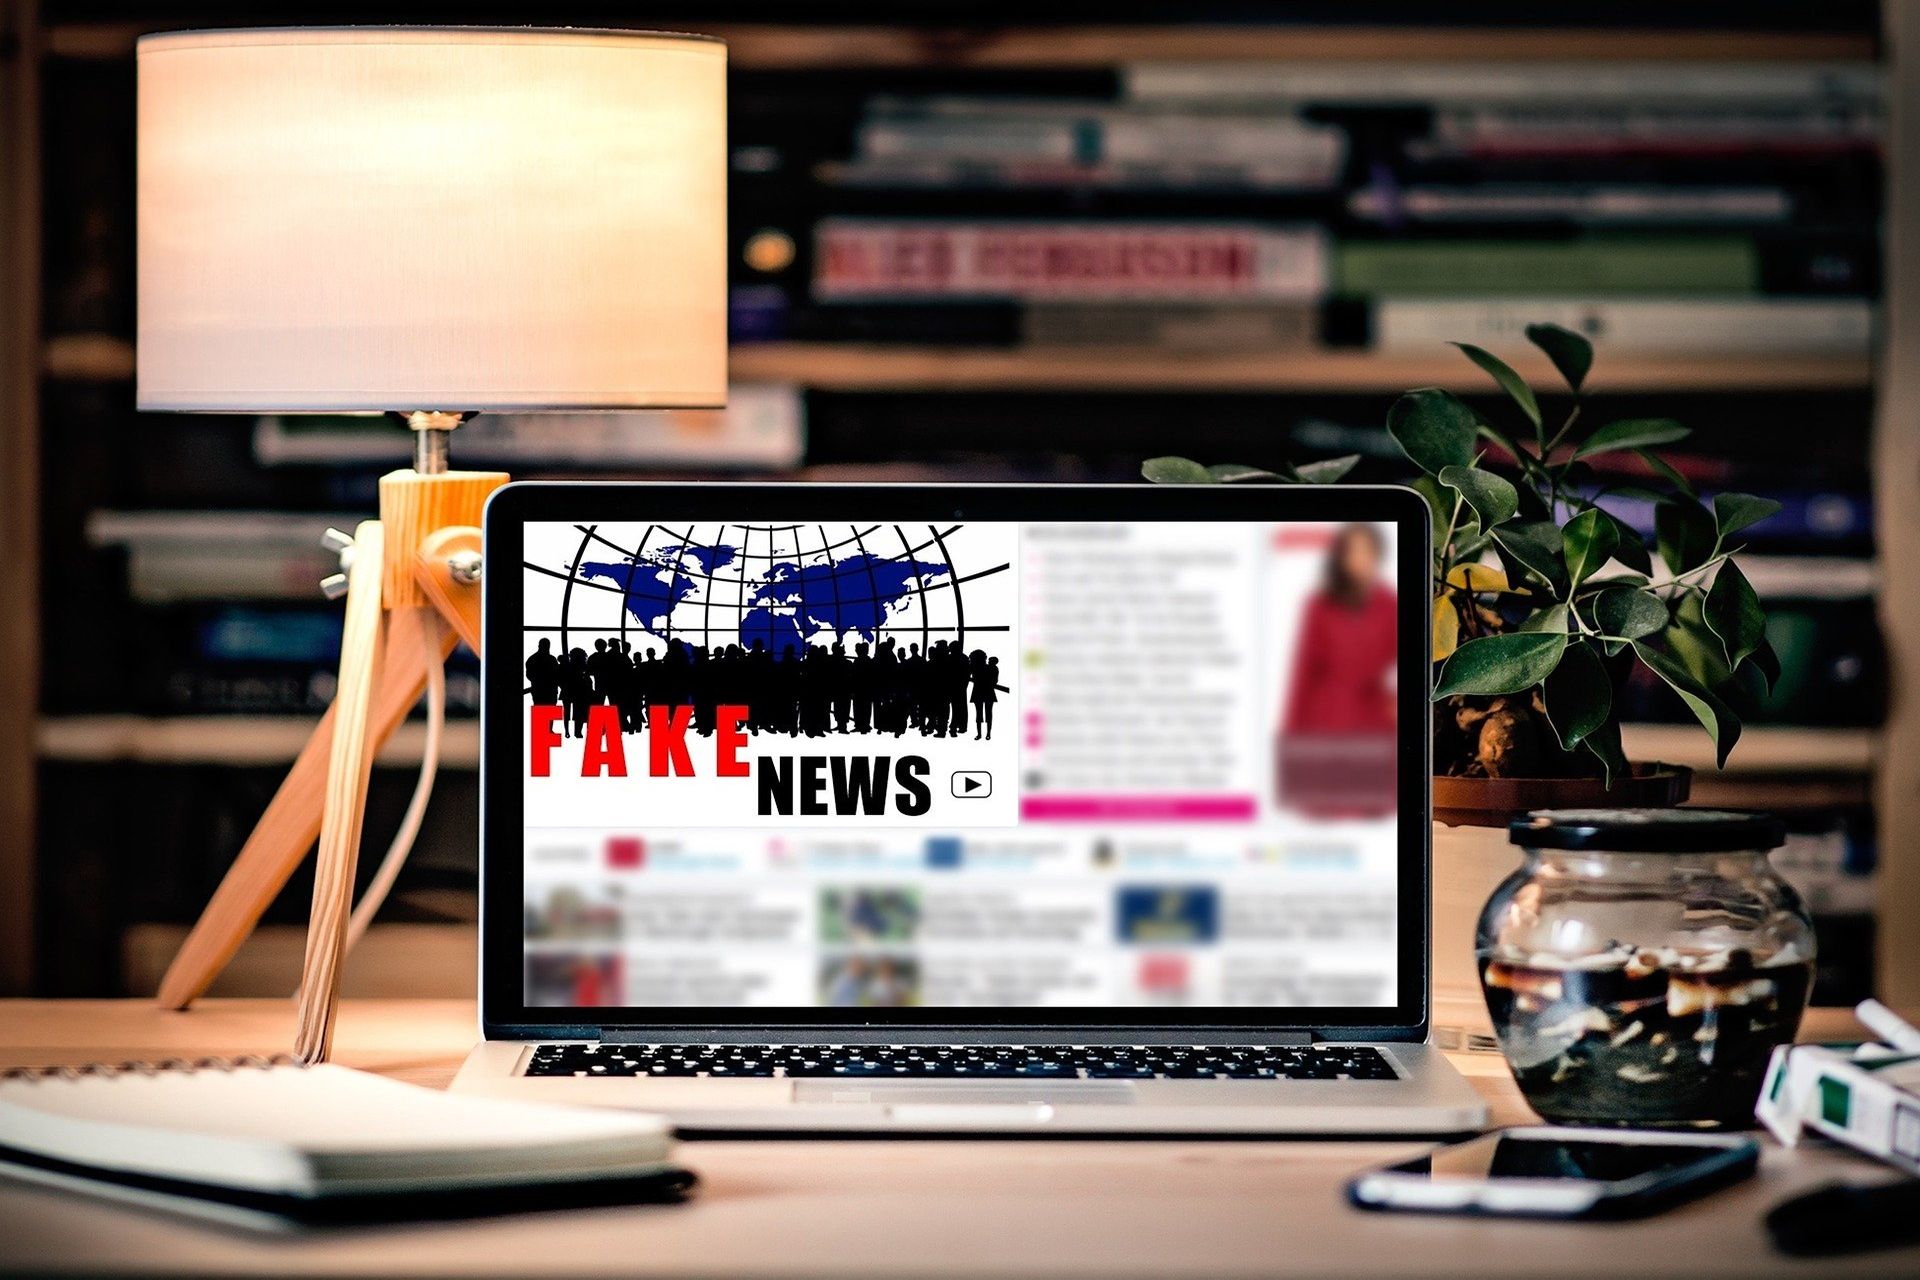 The "fake news" or "fake news" has achieved a significant escalation with the digital transformation and to the extent that social networks have taken on the role of being the "conscience of the world"